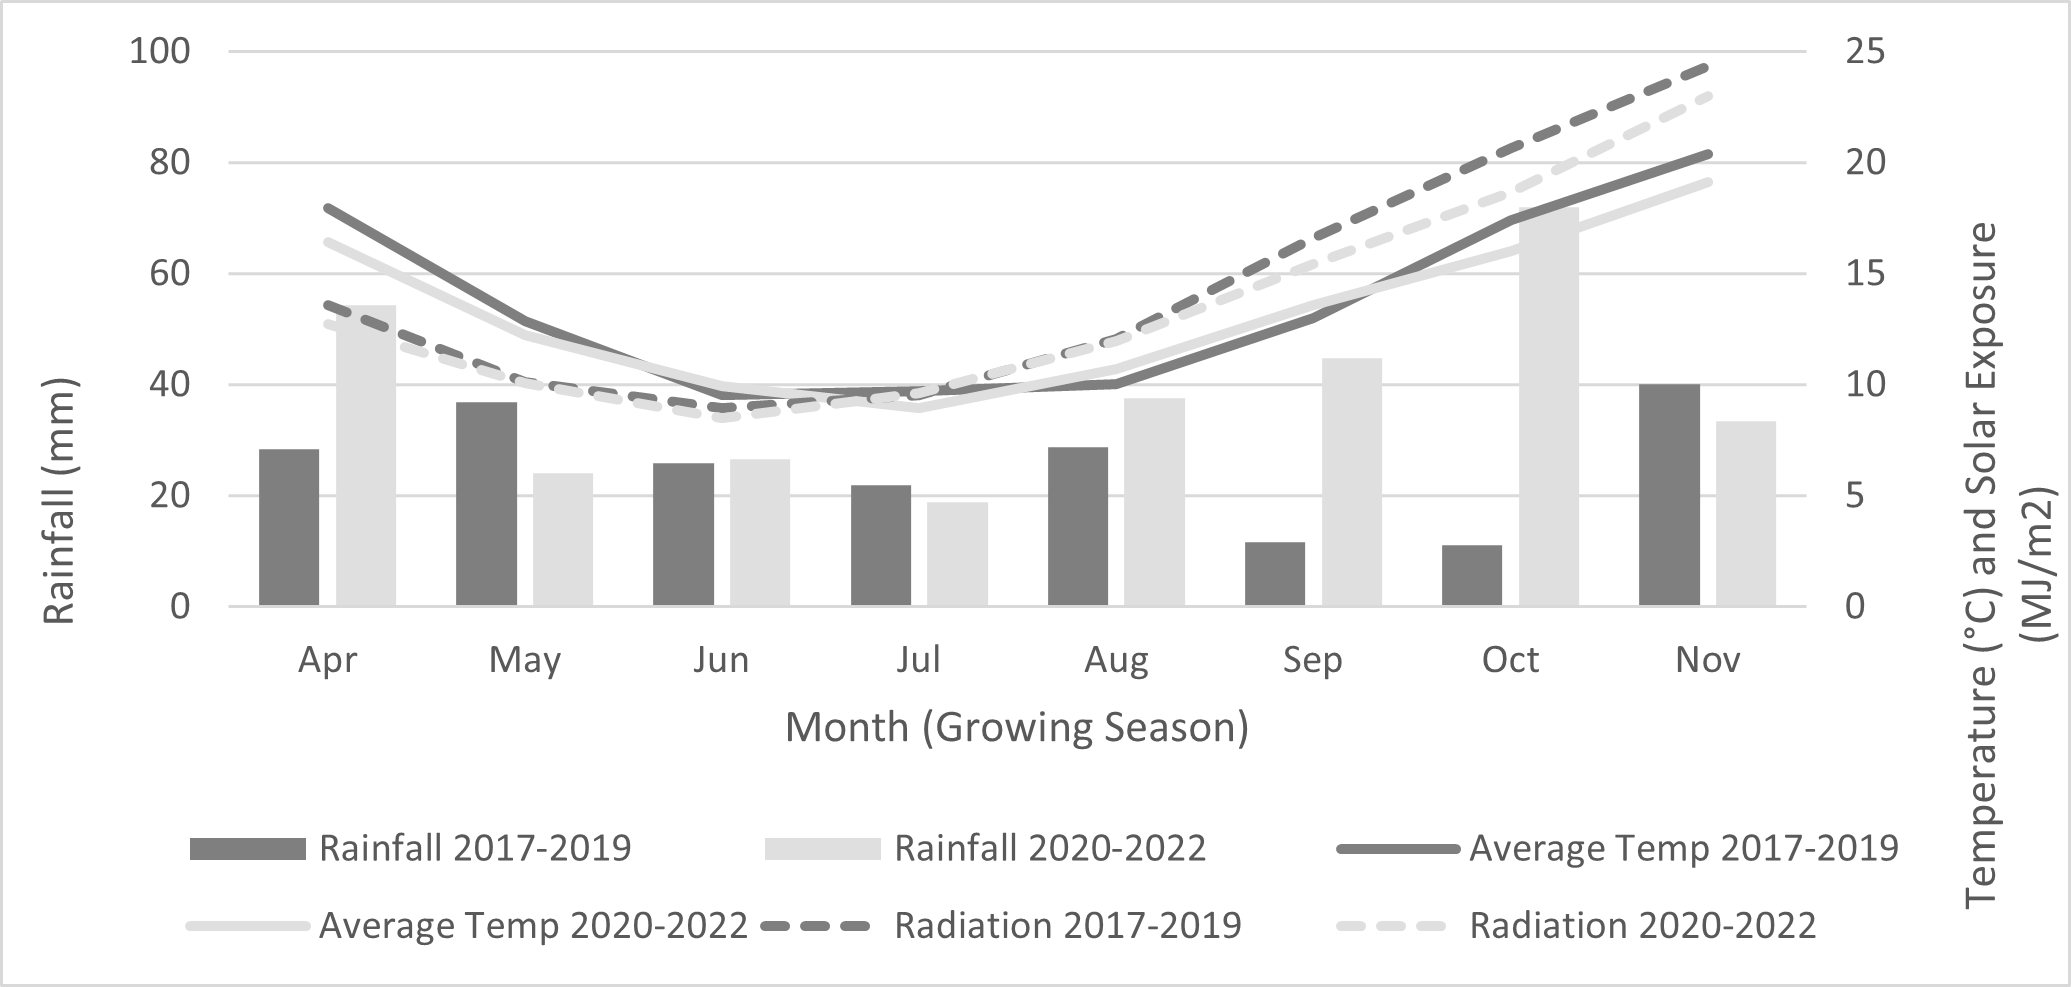 Contrasts of rainfall (need for irrigation), temperatures, solar exposure (radiation) average across 3 years 2017–2019 vs 2020–2022, Kerang, Vic.